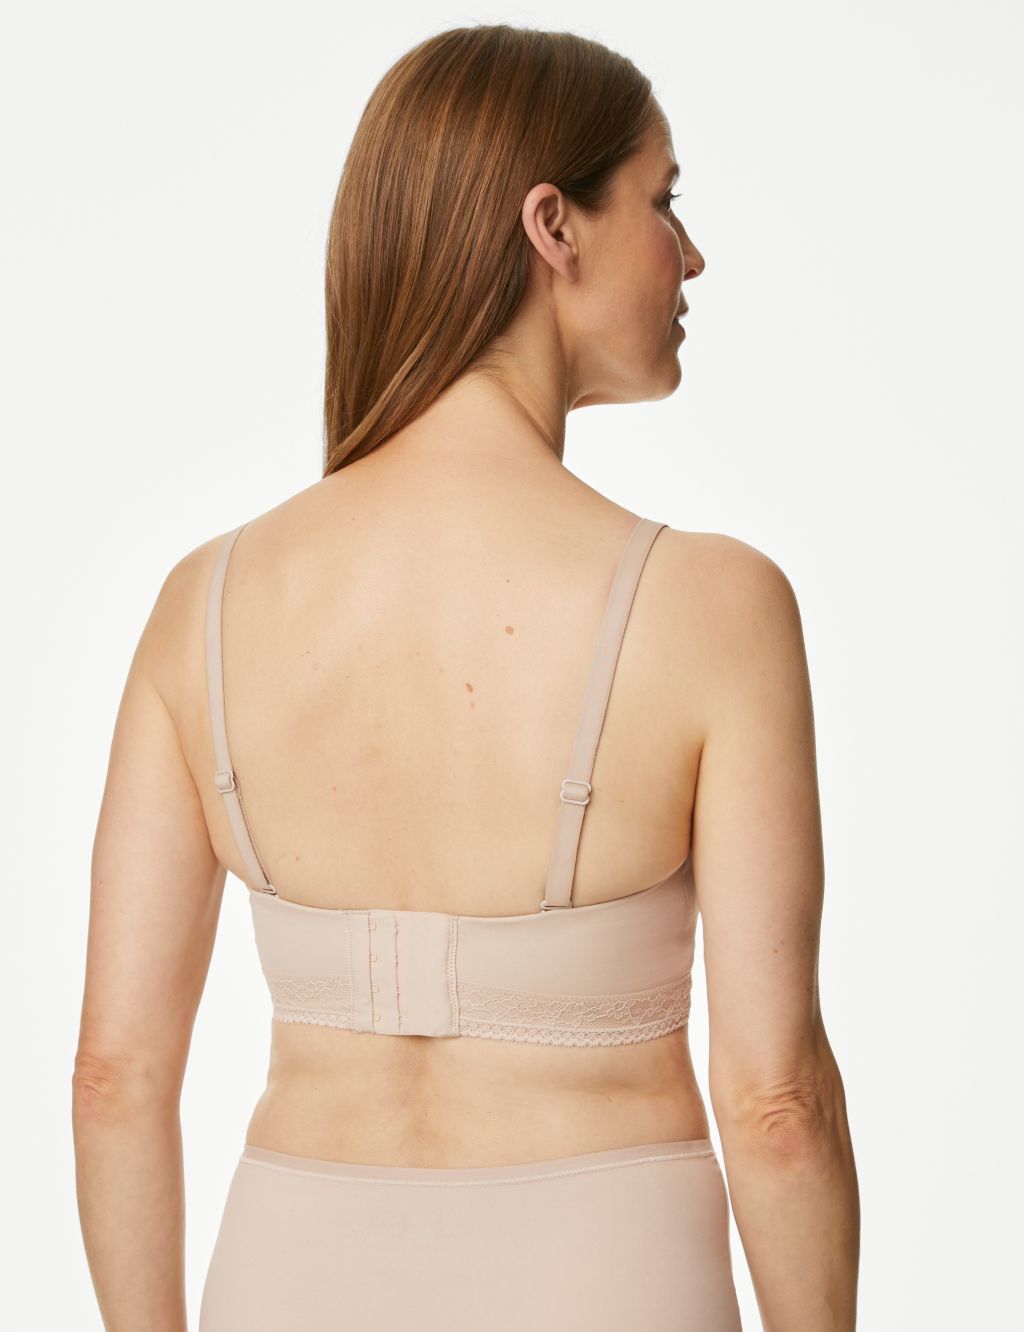 Flexiwired Post Surgery Strapless Bra A-D image 4